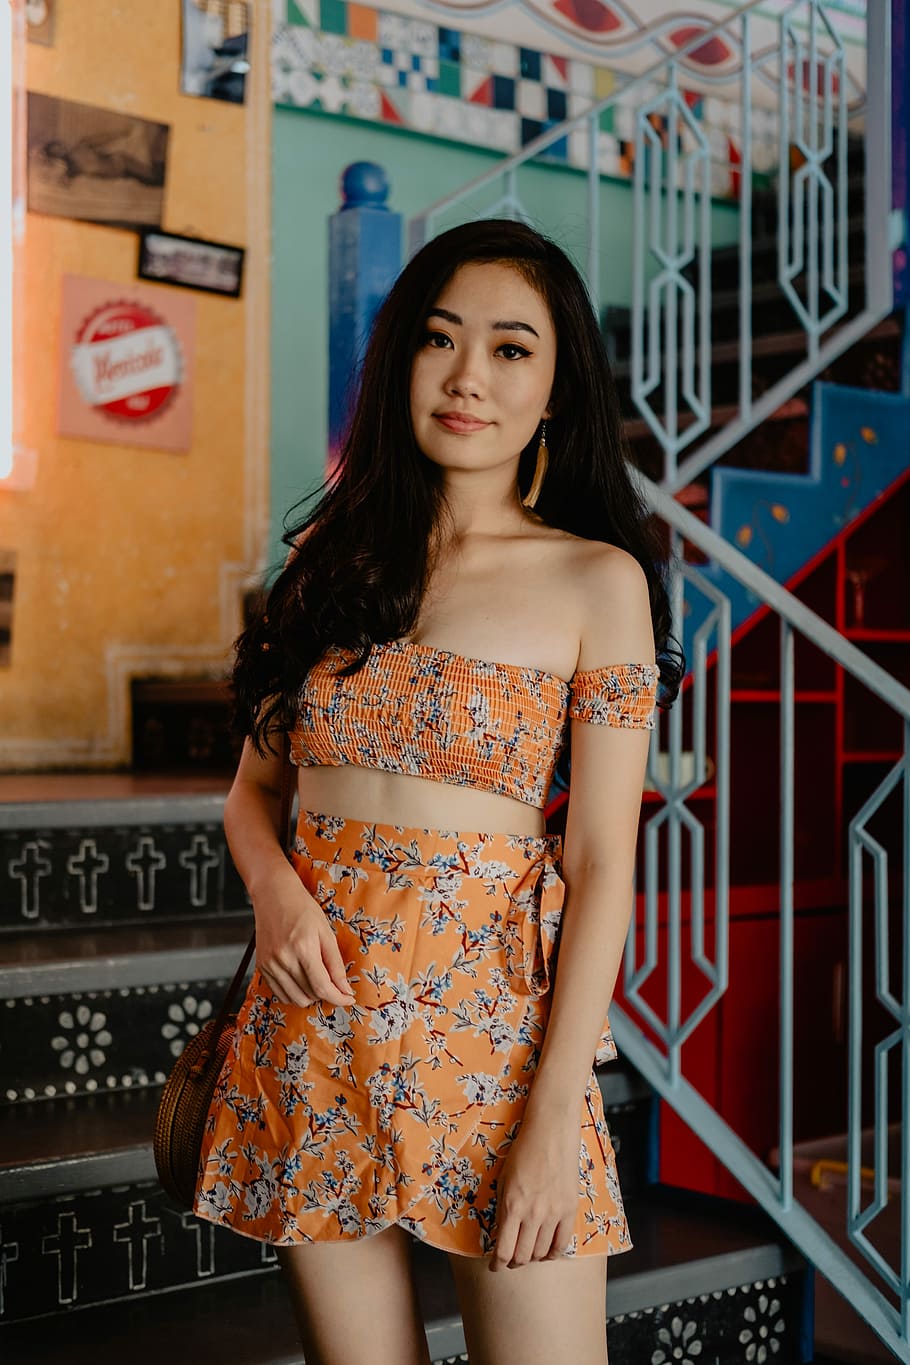 woman wearing orange crop top and skirt on the stairs, selective focus photography of woman wearing off-shoulder bustier top and rompers outfit standing at staircase